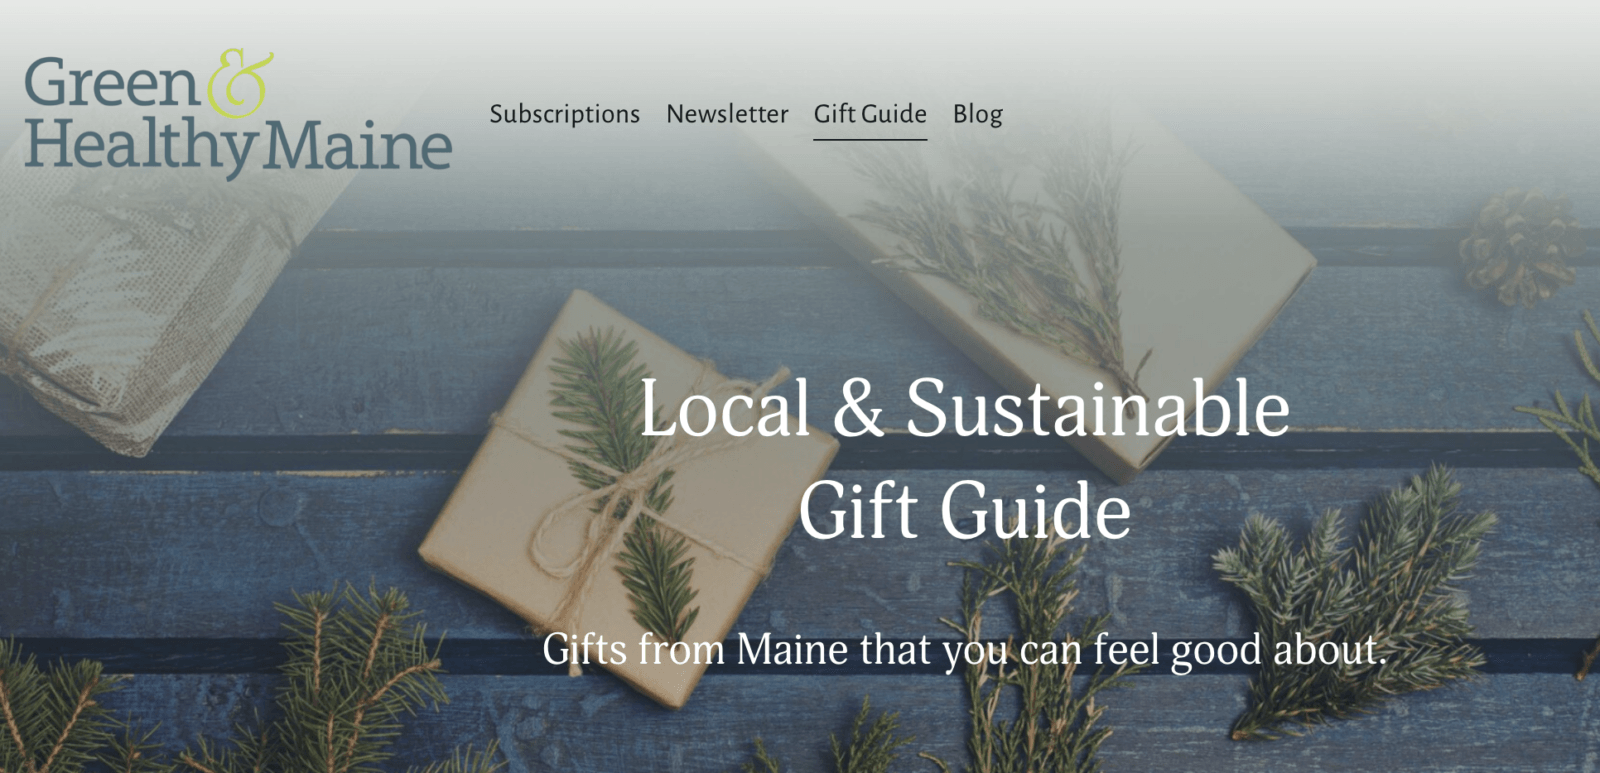 Local & Sustainable Gift Guide: Gifts from Maine that you can feel good about.